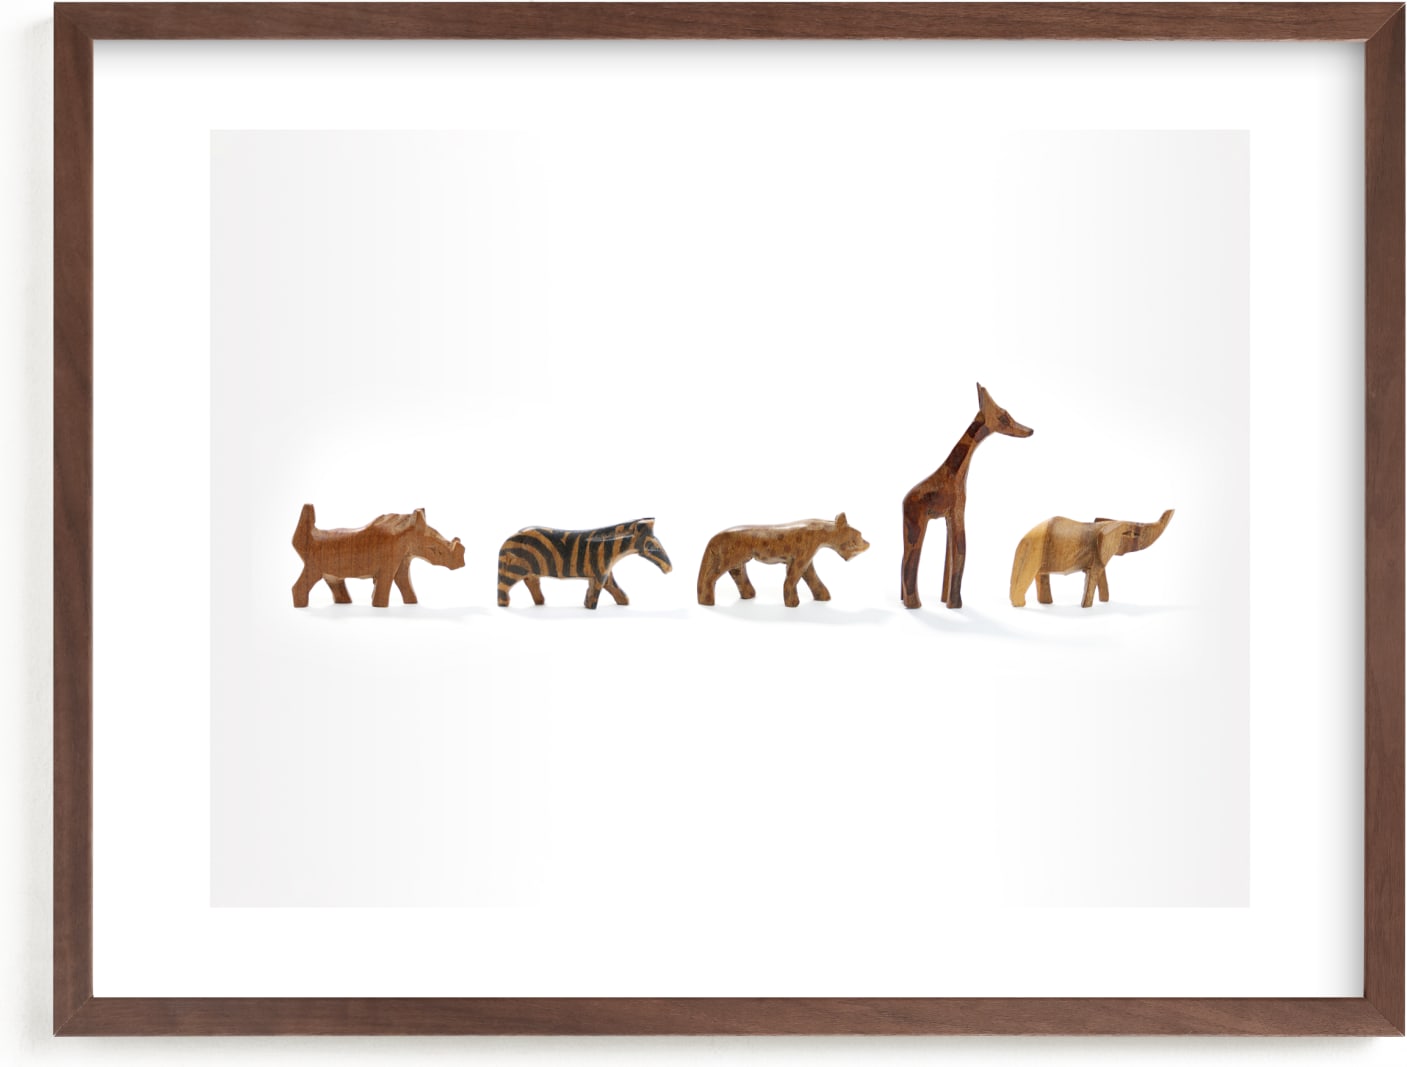 This is a brown art by Katie Cooper Bussell called Safari March.